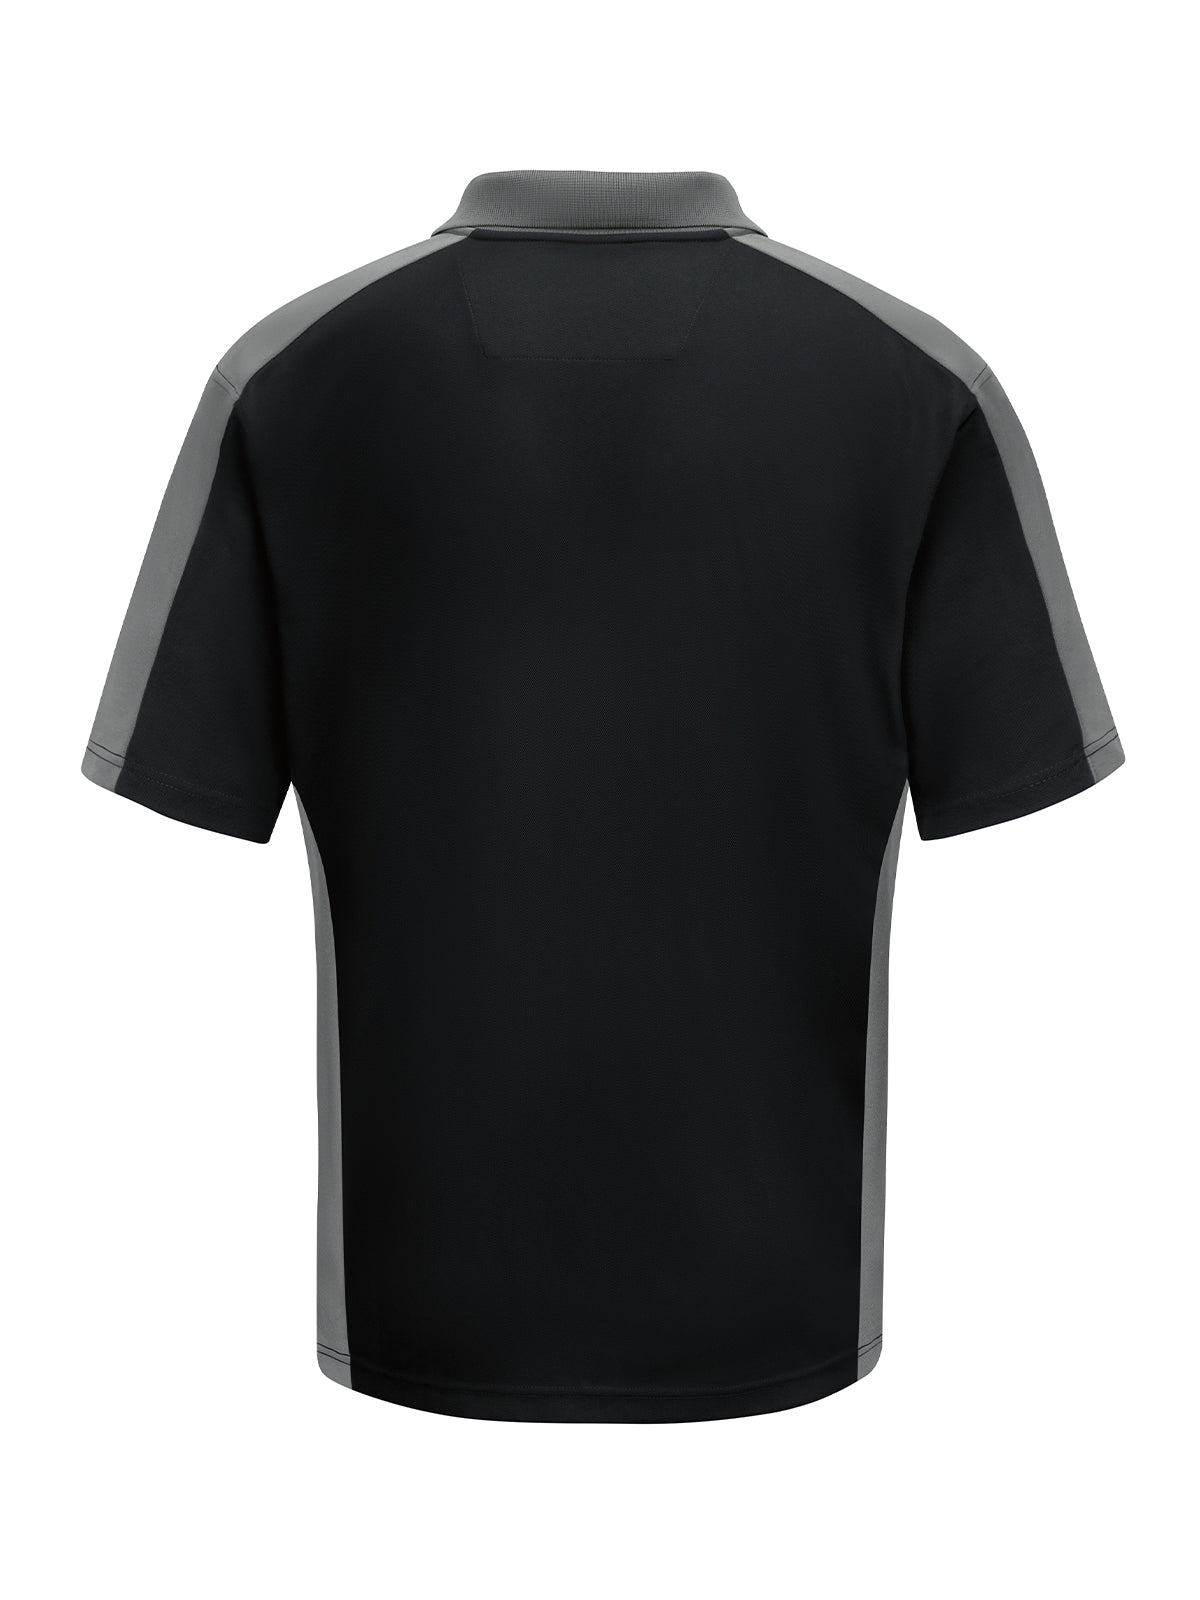 Men's Short Sleeve Performance Knit Two-Tone Polo